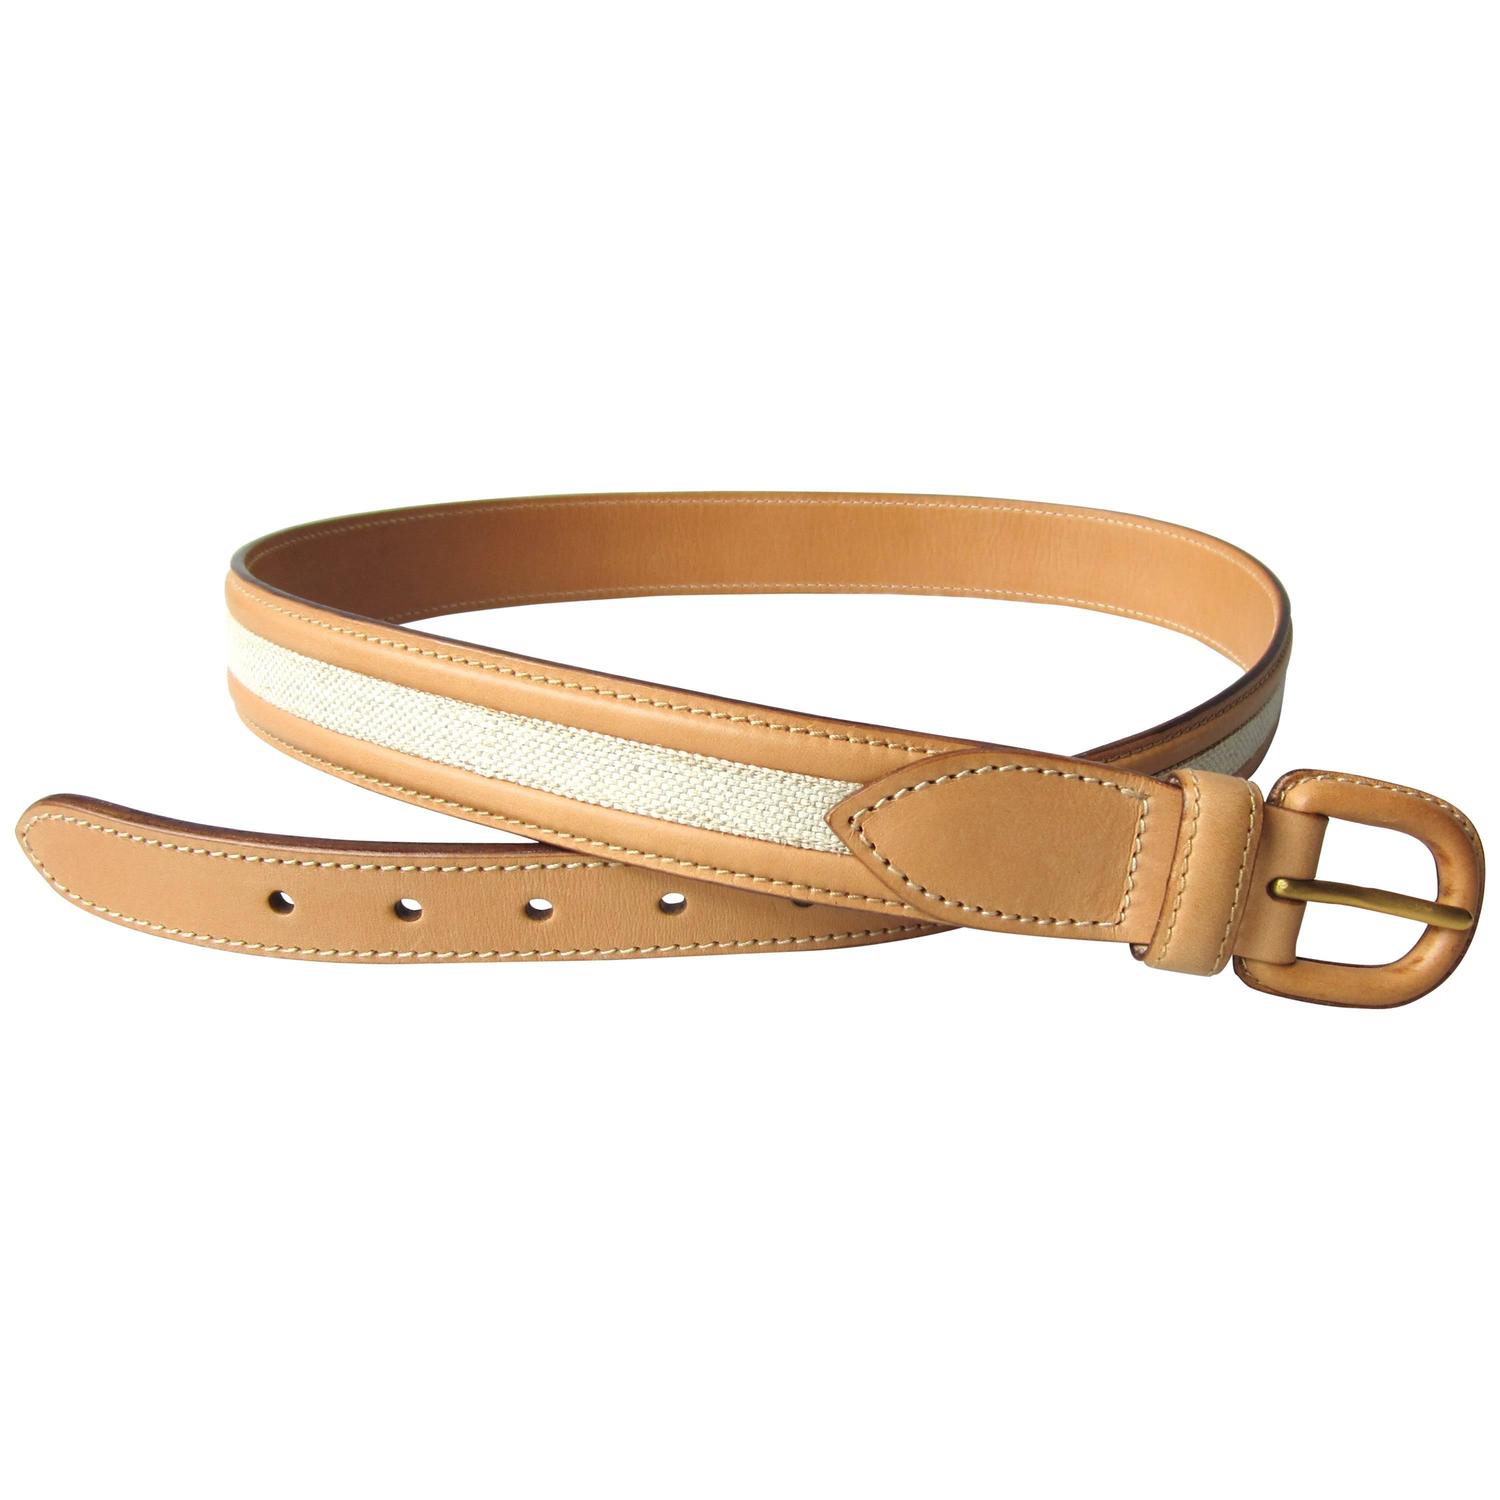 GUCCI Tan Leather / Canvas BELT Men Women Unisex For Sale at 1stdibs